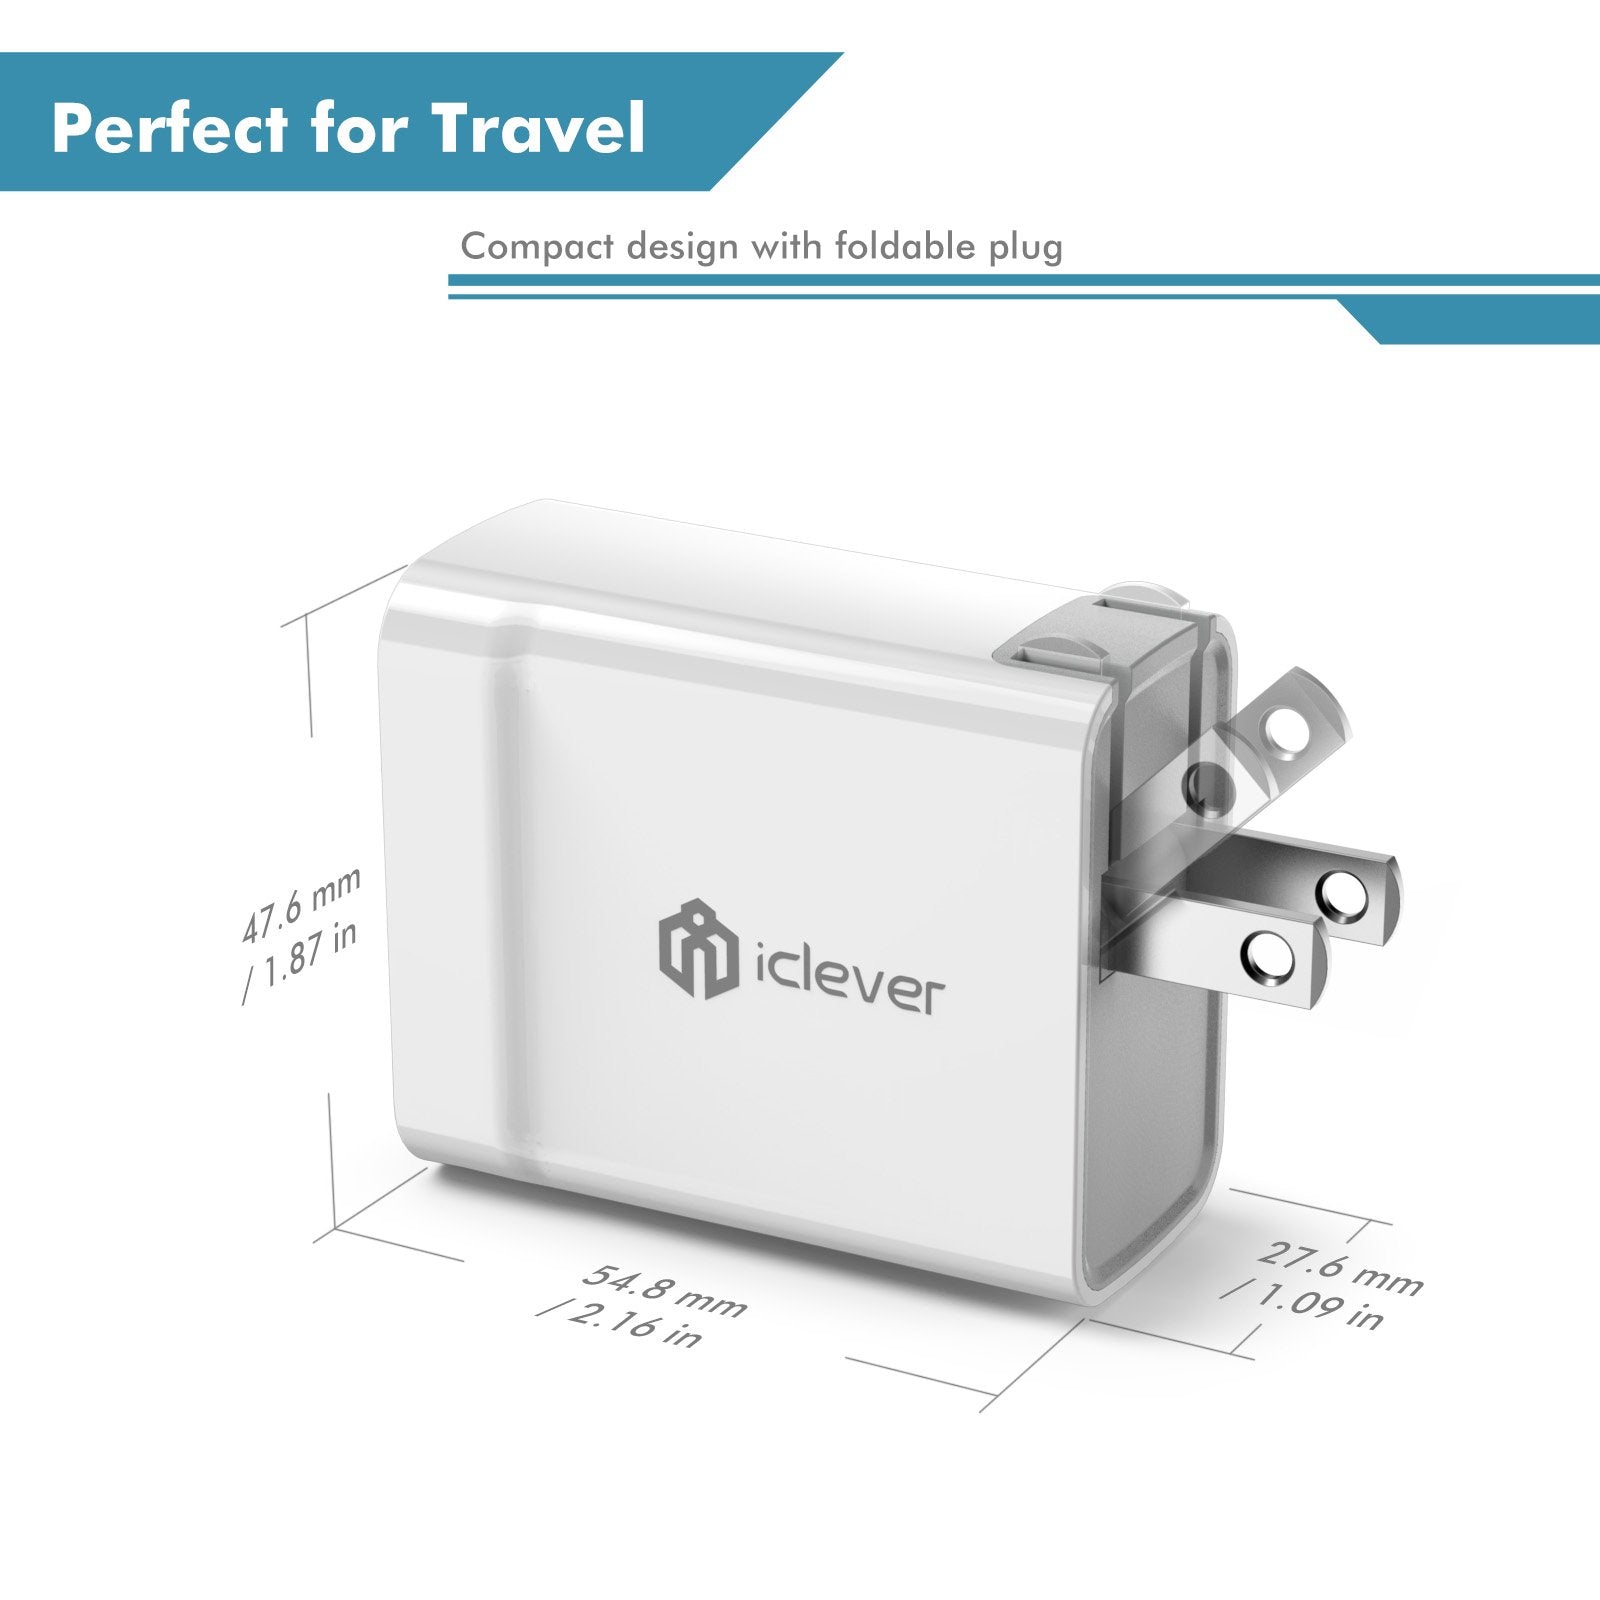 iClever 24W Dual USB Wall Charger with 2 SmartID Charging Port(5V/2.4A Each), Portable Travel Charger with 100-240V Input, Foldable Plug